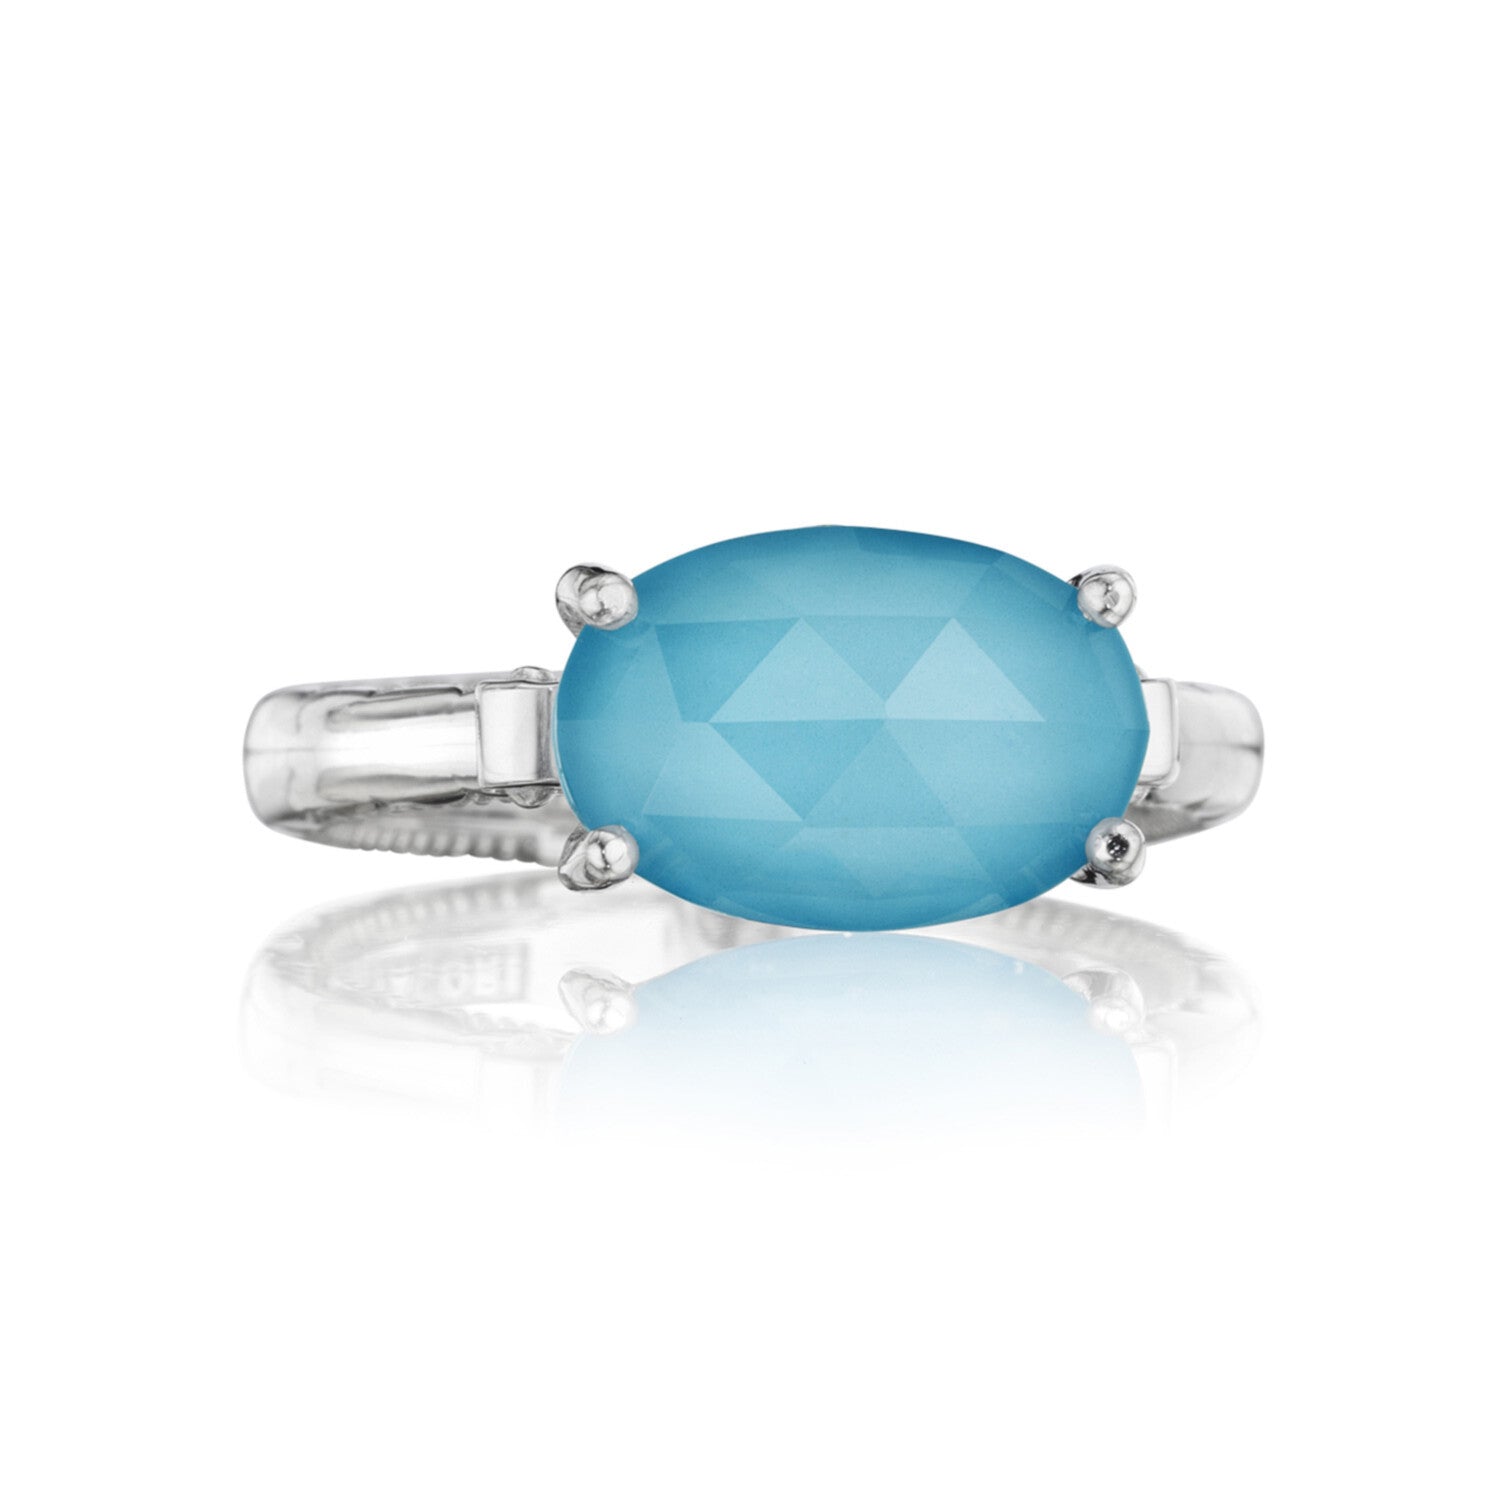 Tacori East-West Oval Ring featuring Neo-Turquoise